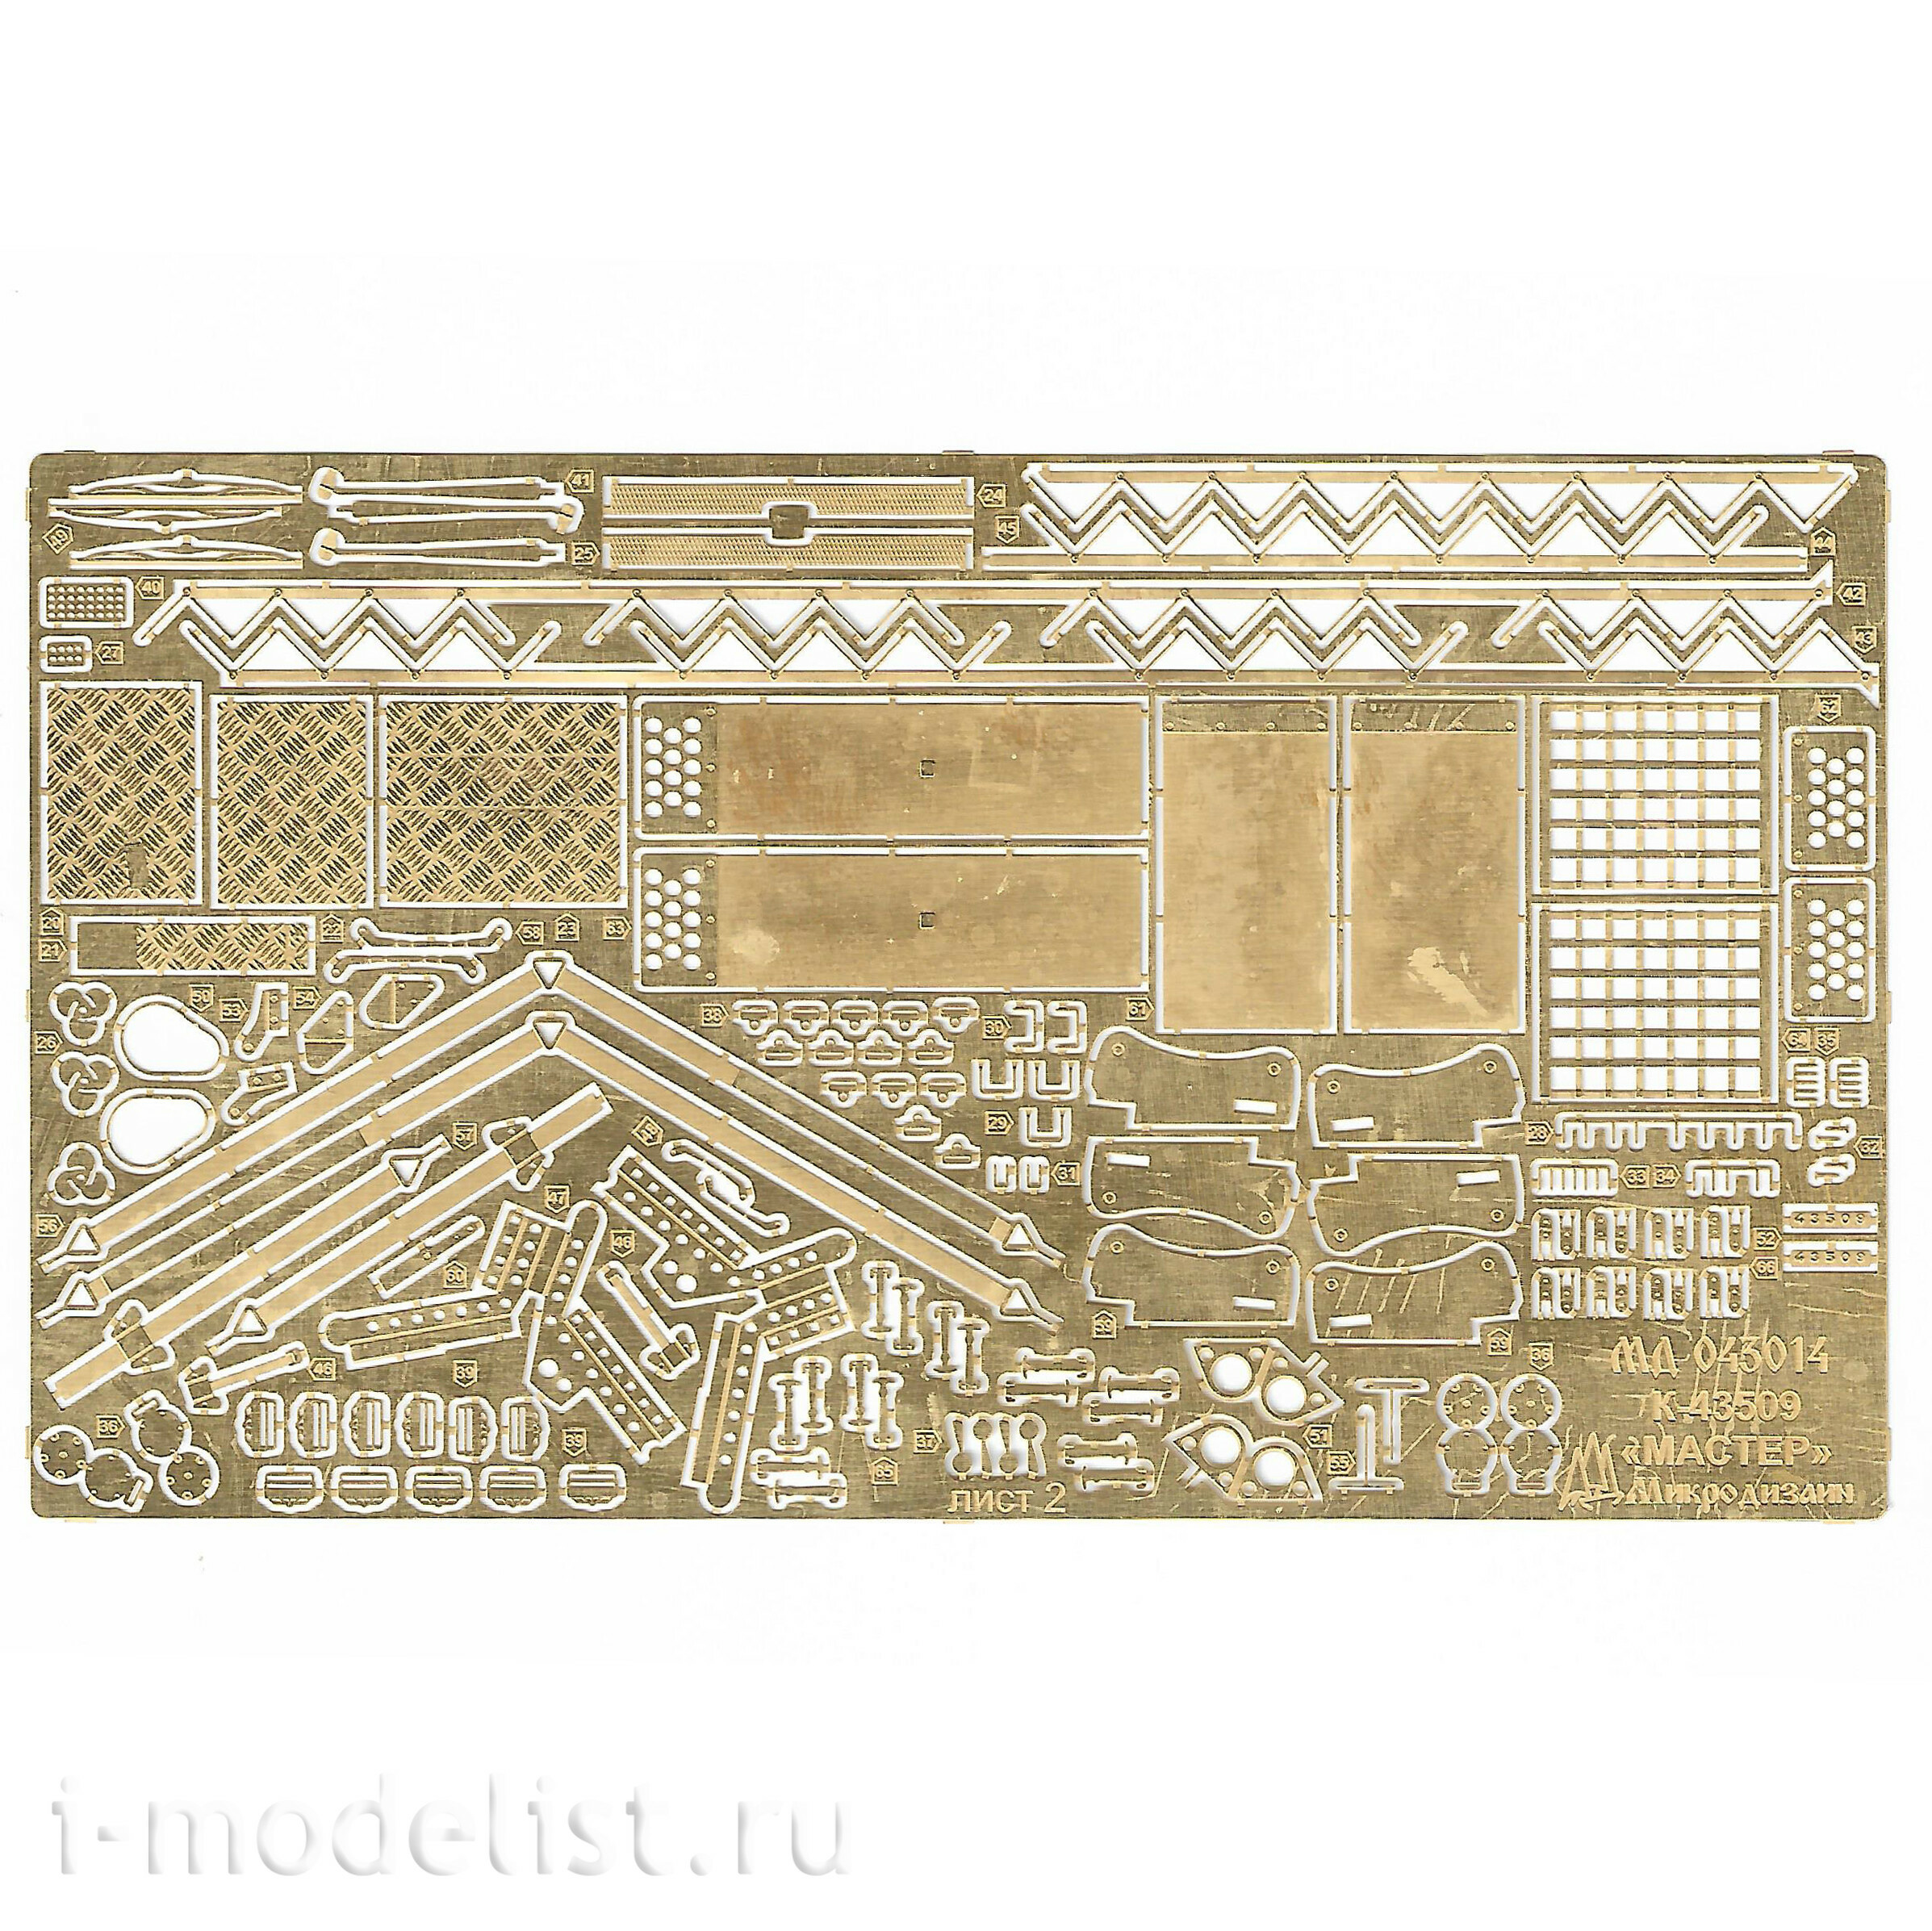 043014 Microdesign 1/43 Photo etching kit for the K-43509 